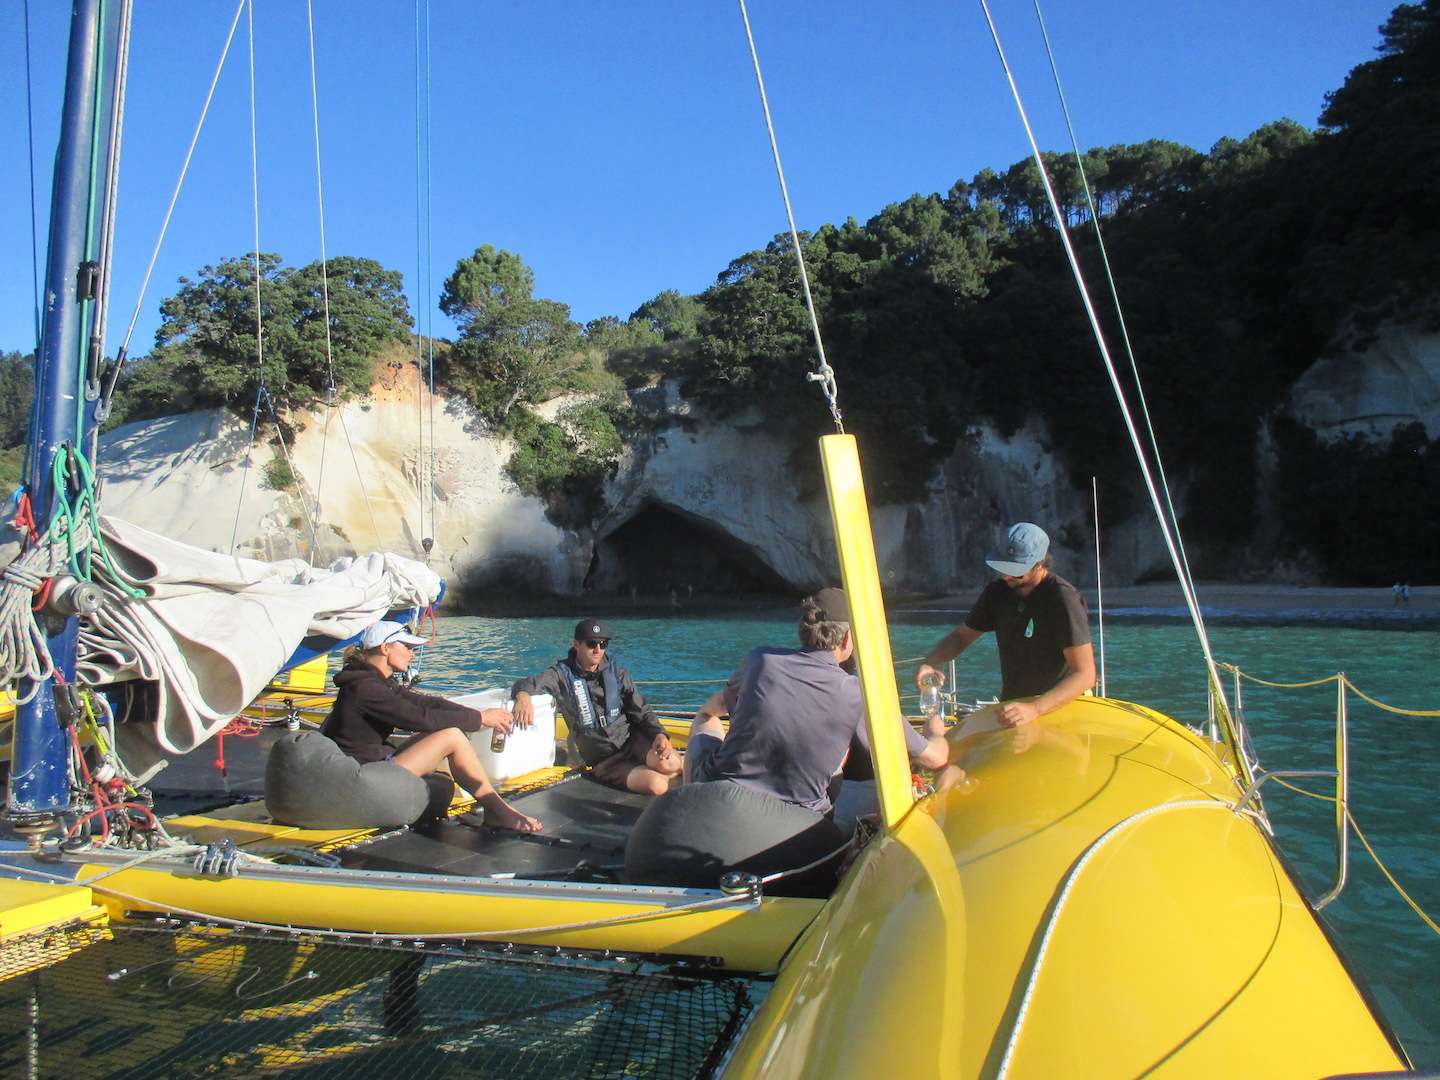 Our crew pours a drink for guests parked infront of Cathedral Cove